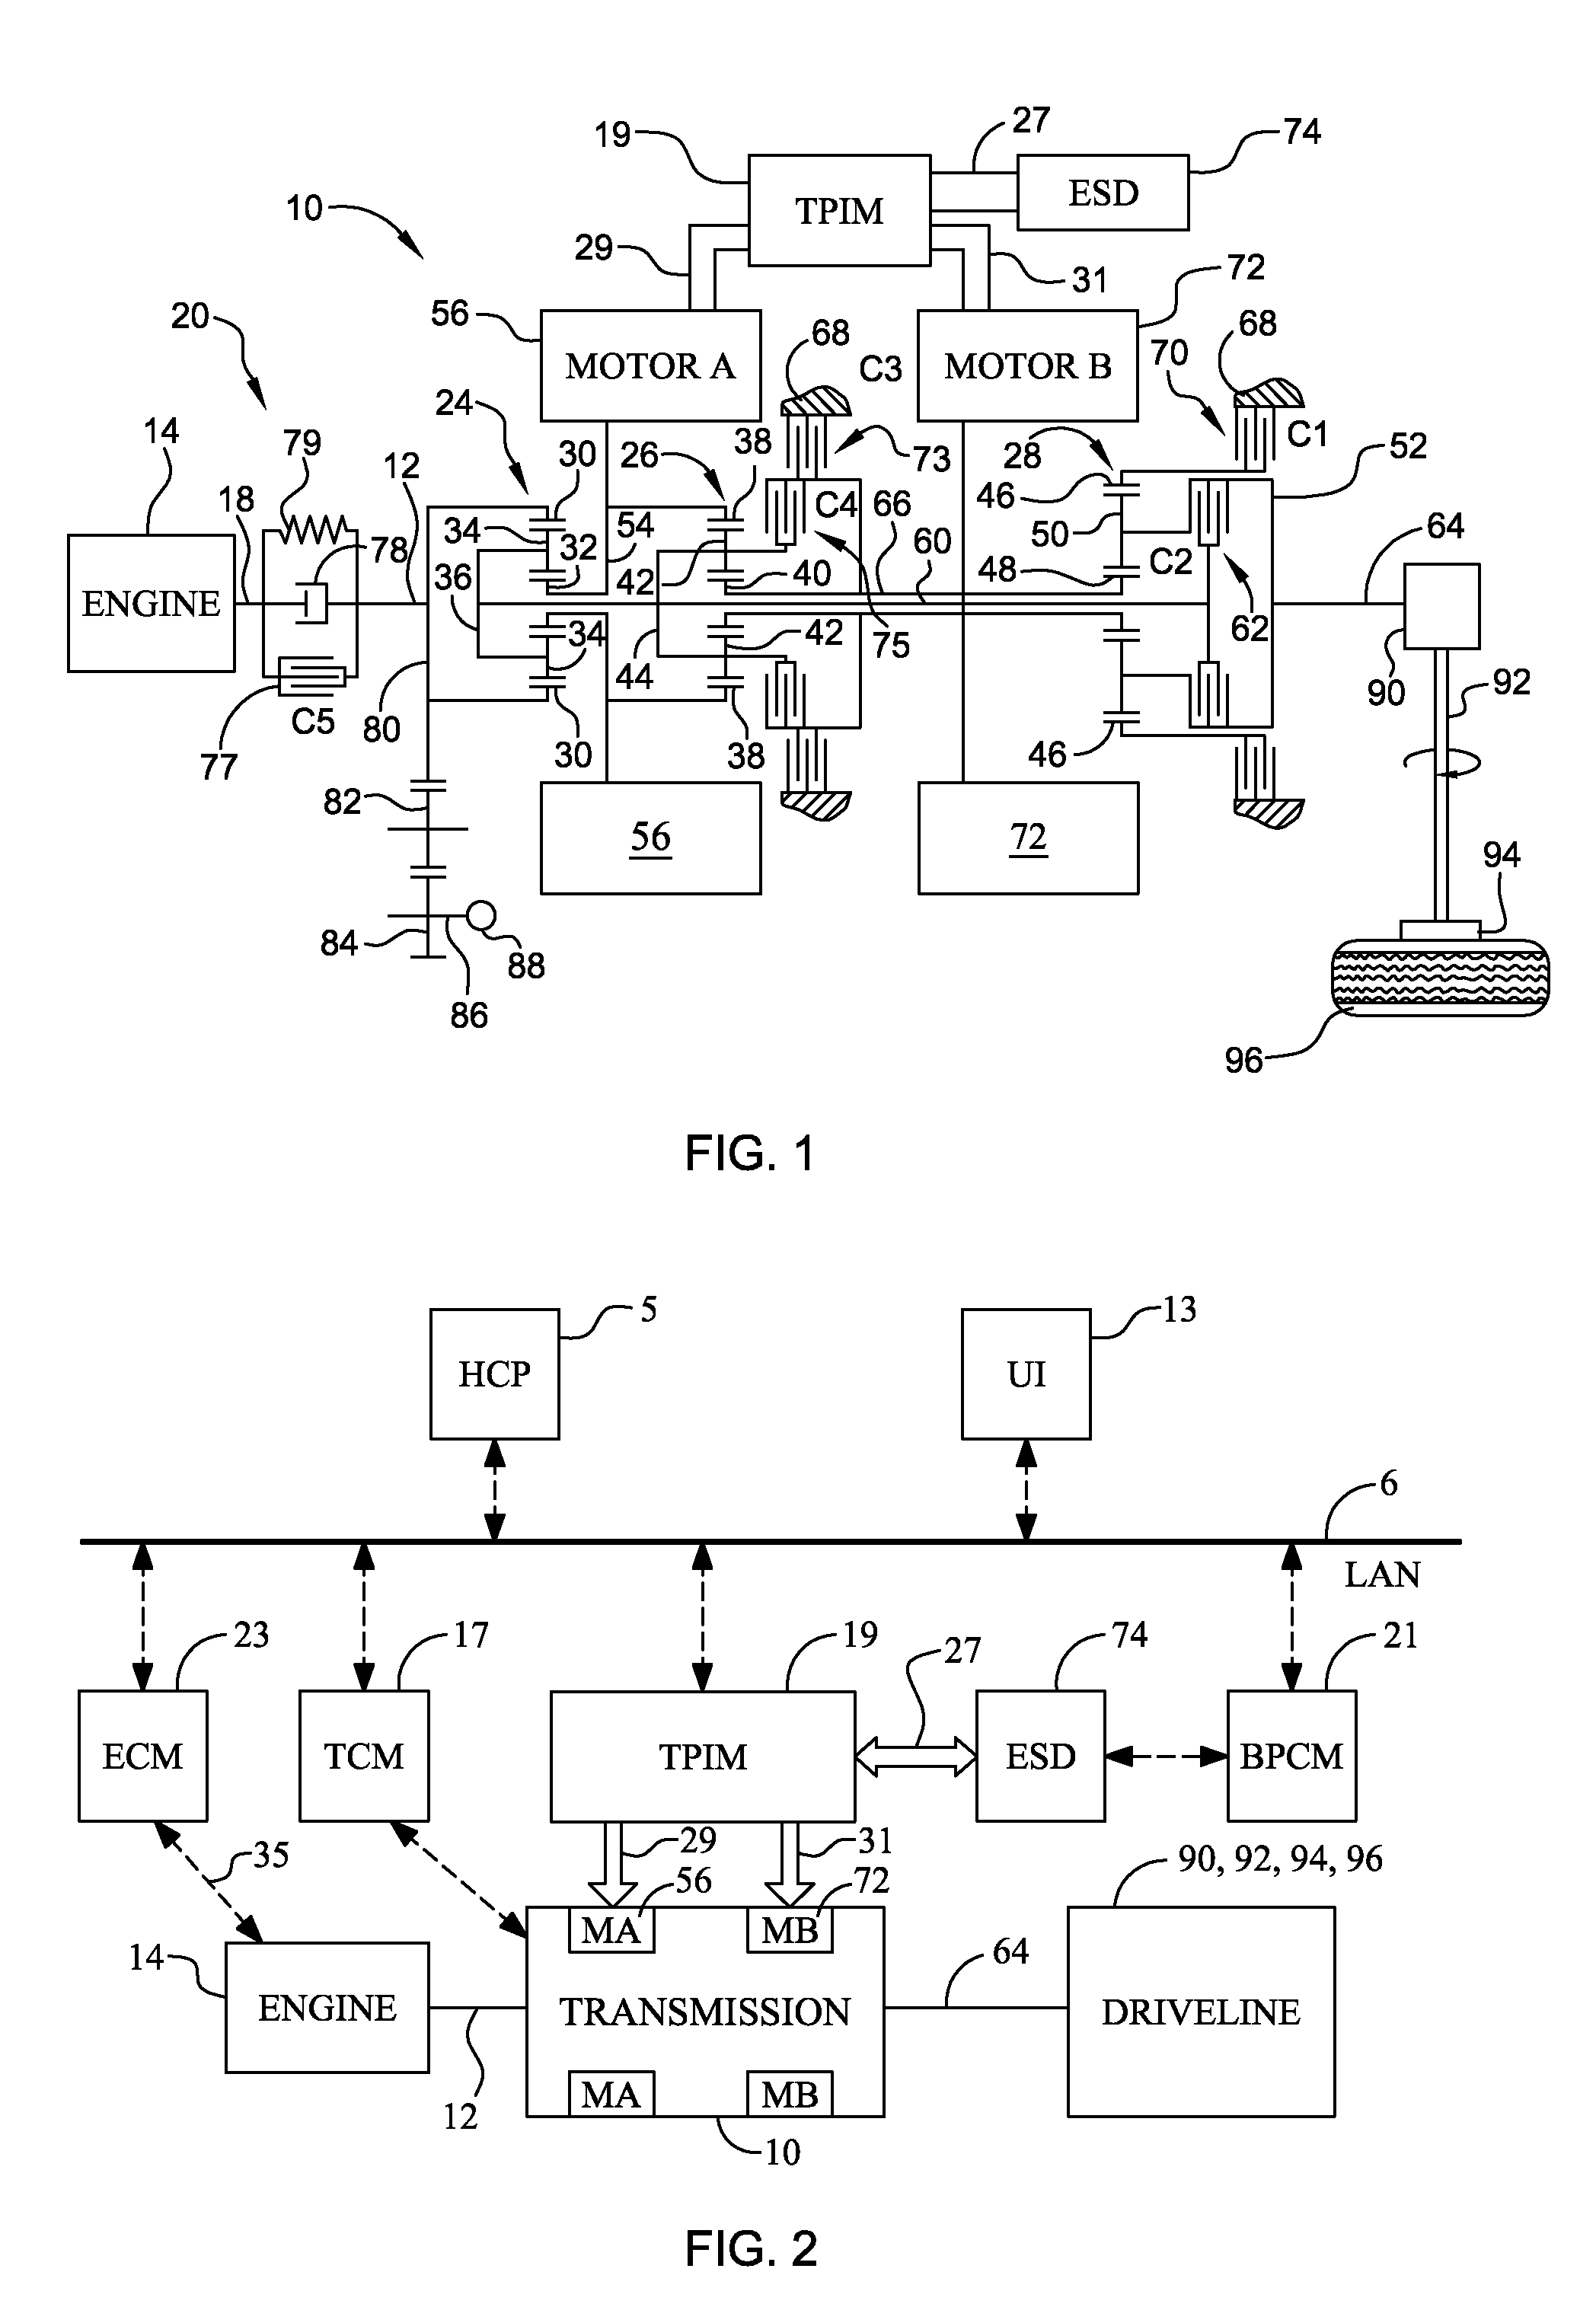 Apparatus and Method for Regulating Active Driveline Damping in Hybrid Vehicle Powertrain